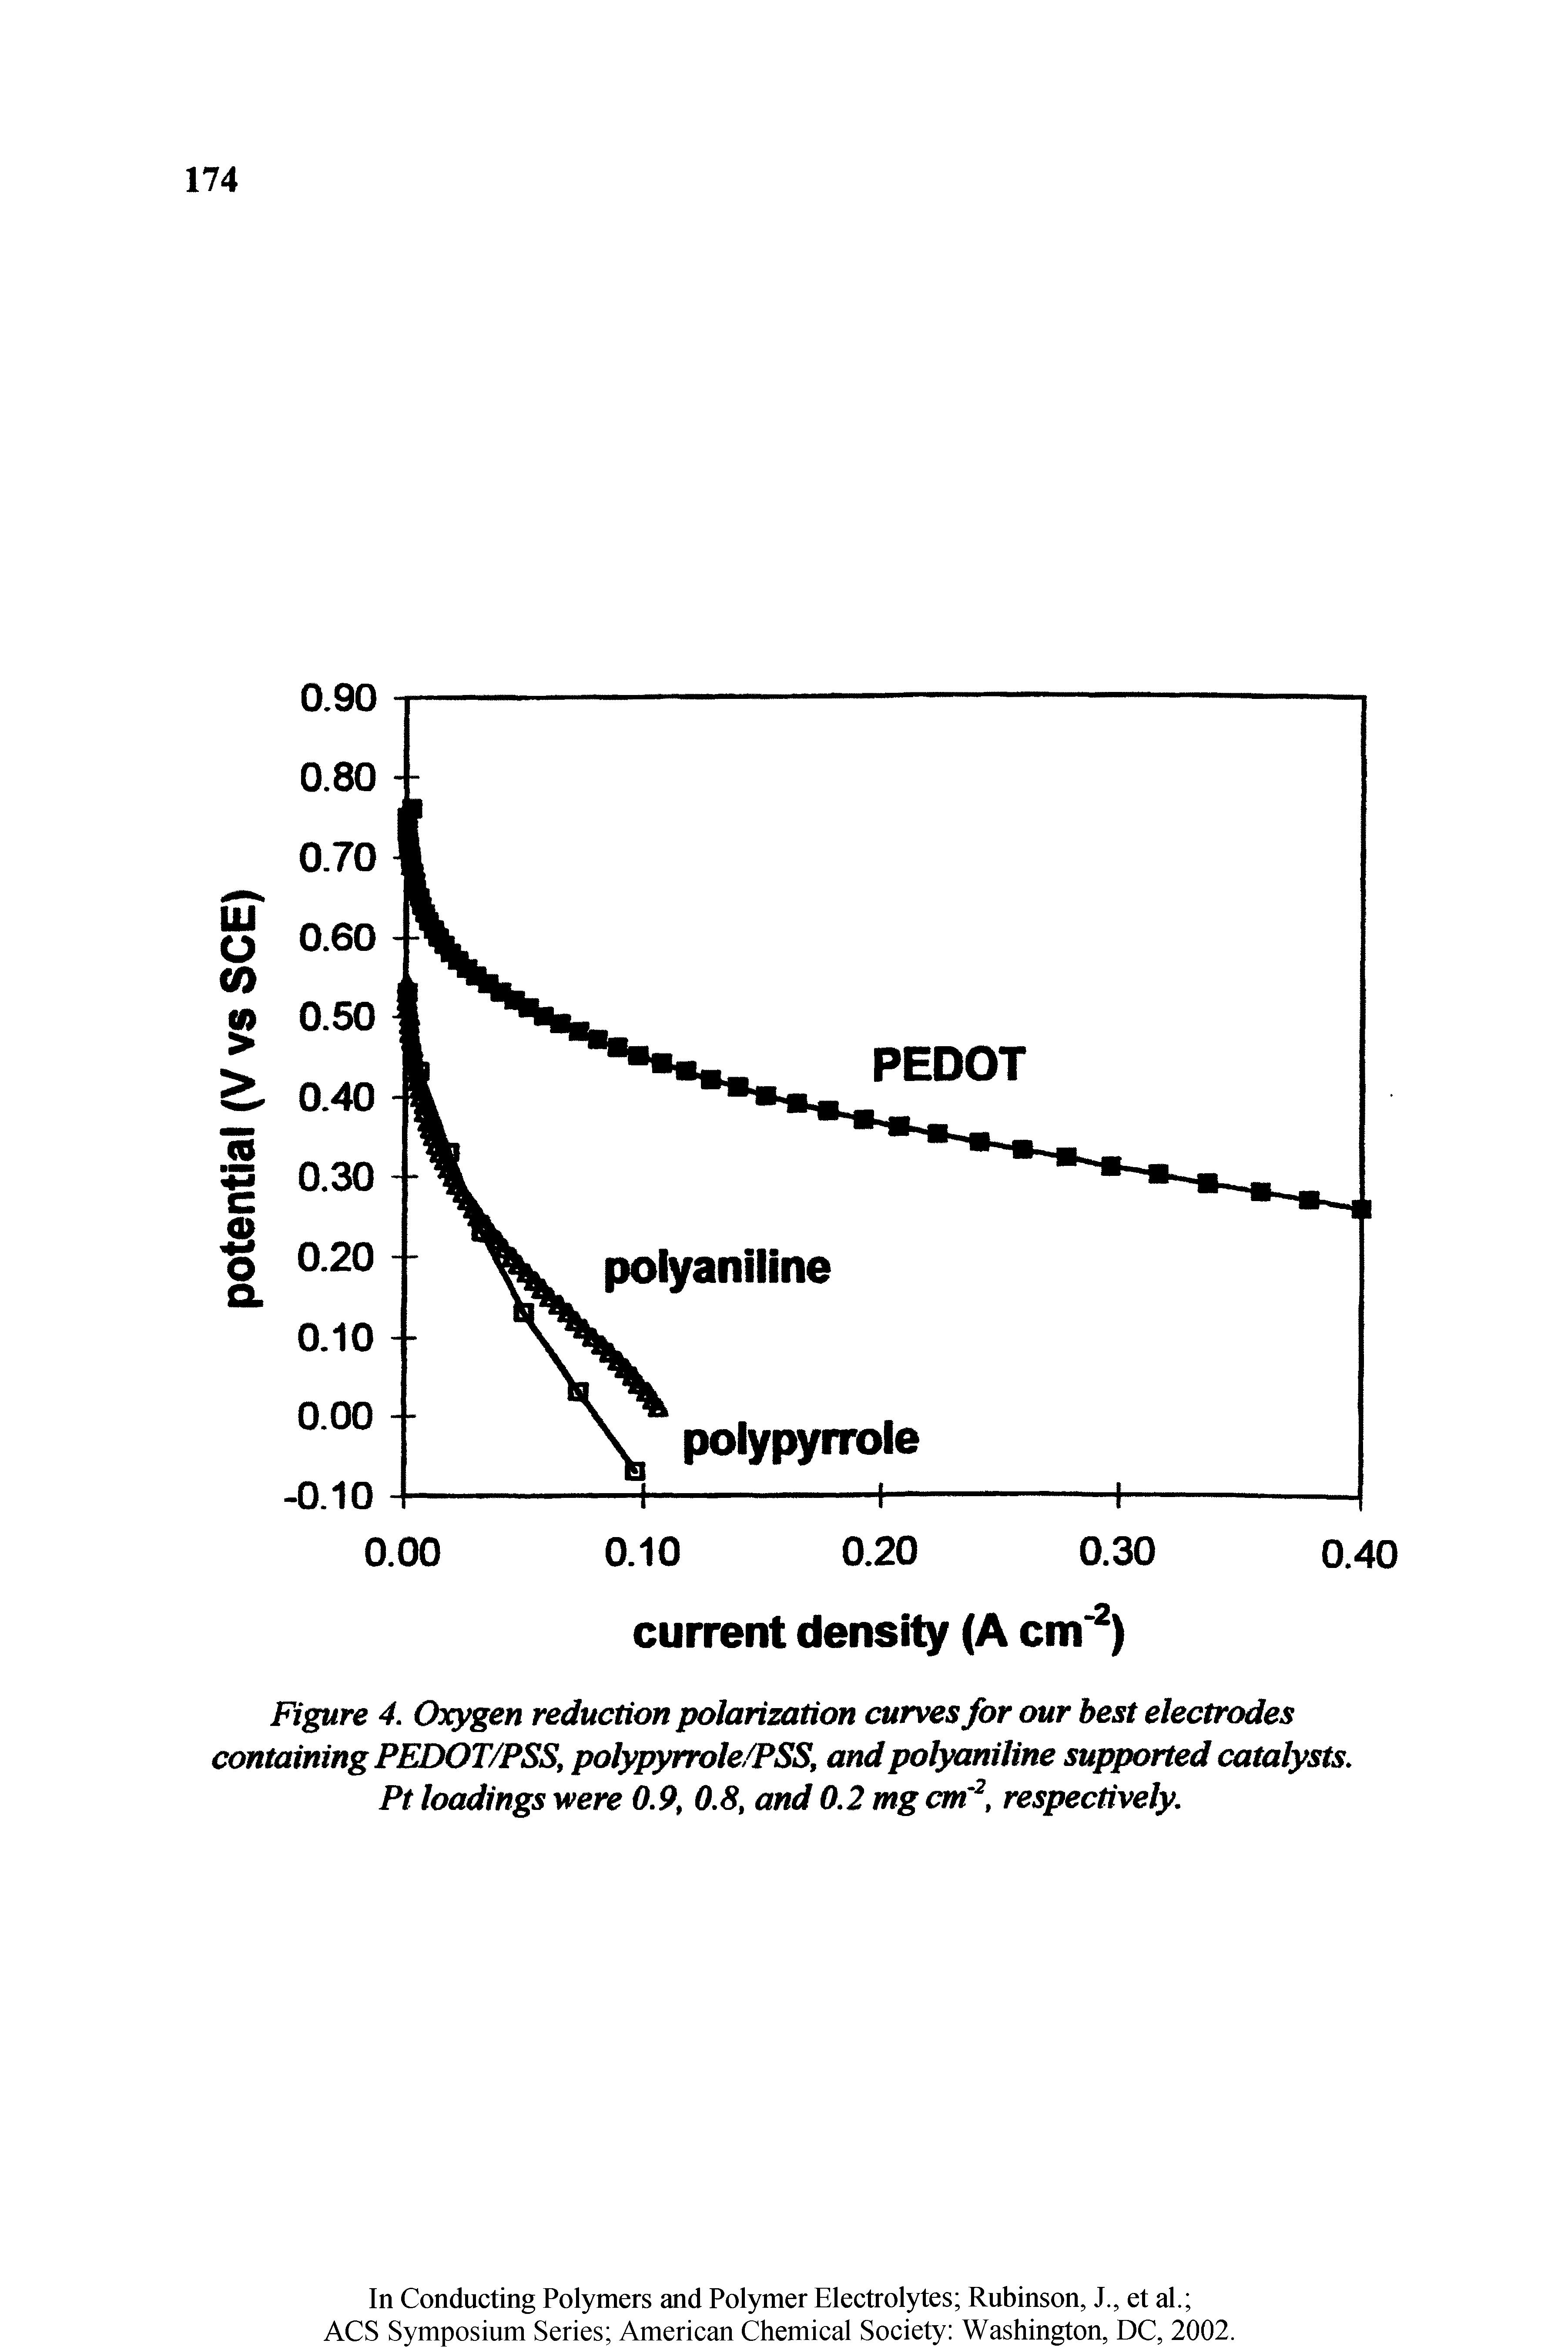 Figure 4. Oxygen reduction polarization curves for our best electrodes containing PEDOT/PSS, polyiqnrole/PSS, and polyaniline supported catalysts. Pt loadings were 0.9, 0.8, and 0.2 mg cm, respectively.